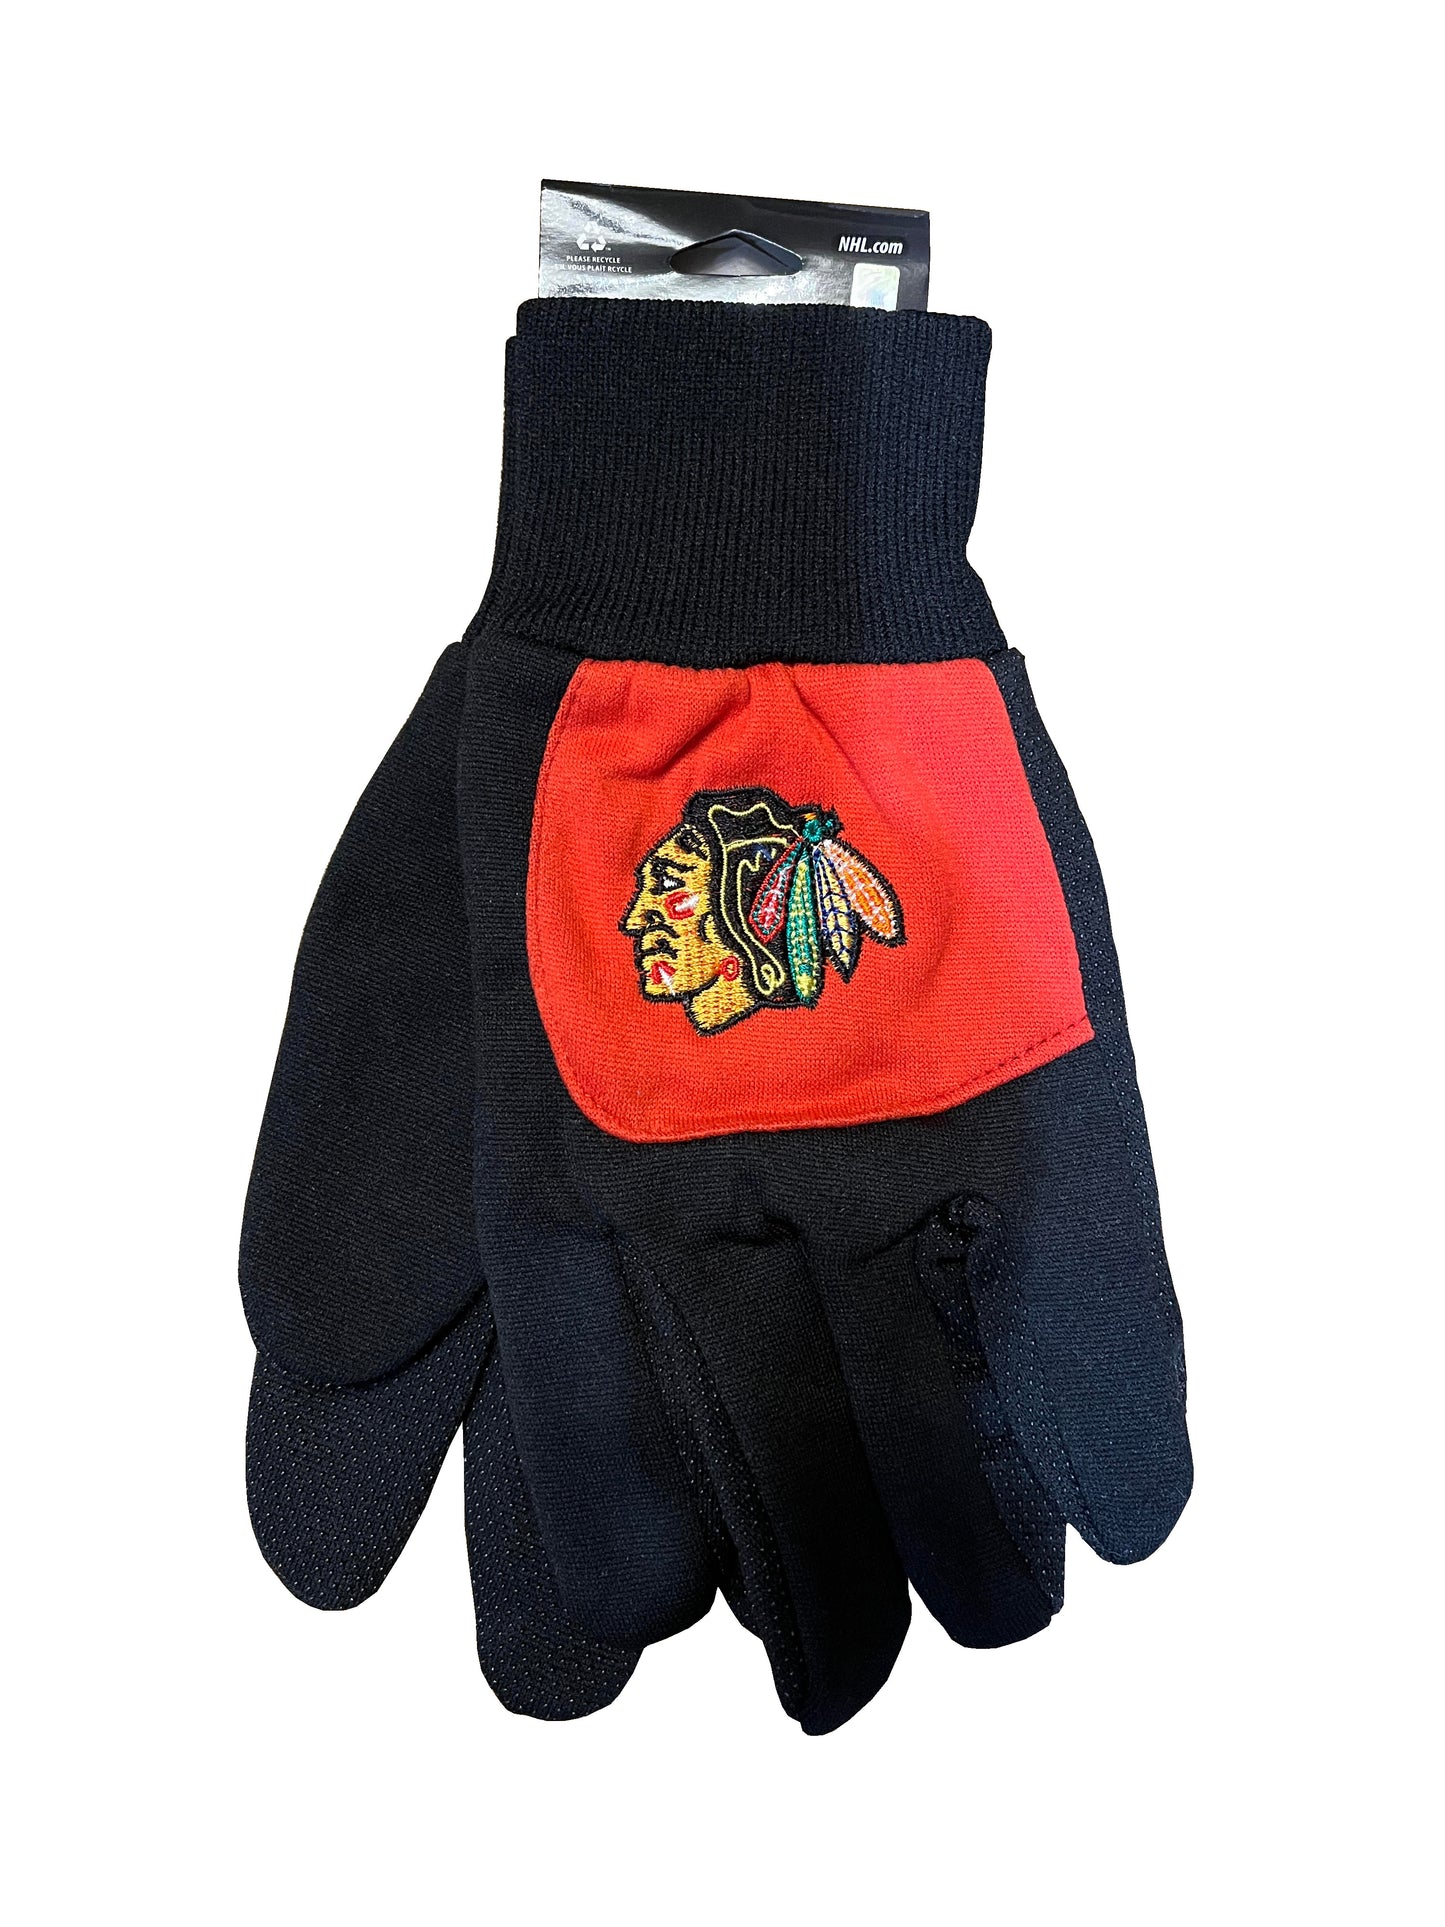 Forever Collectibles NHL Blackhawks Utility Gloves